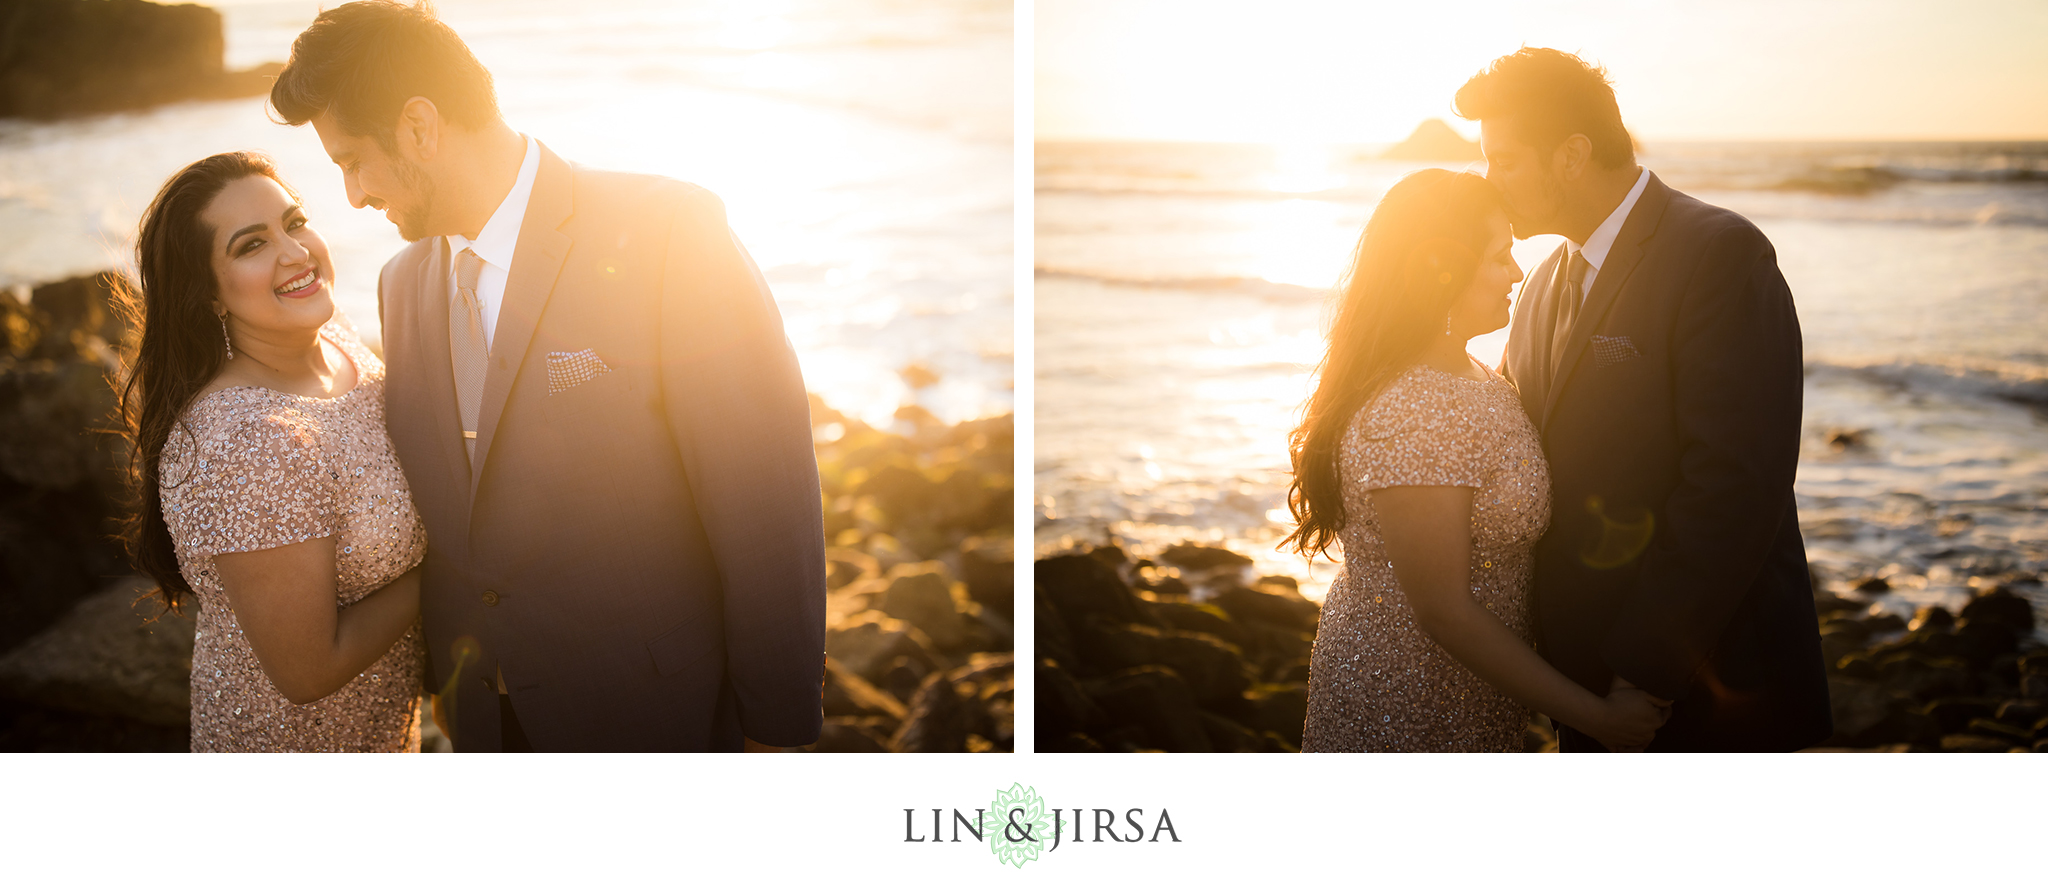 16-San-francisco-muir-woods-marin-county-engagement-photography